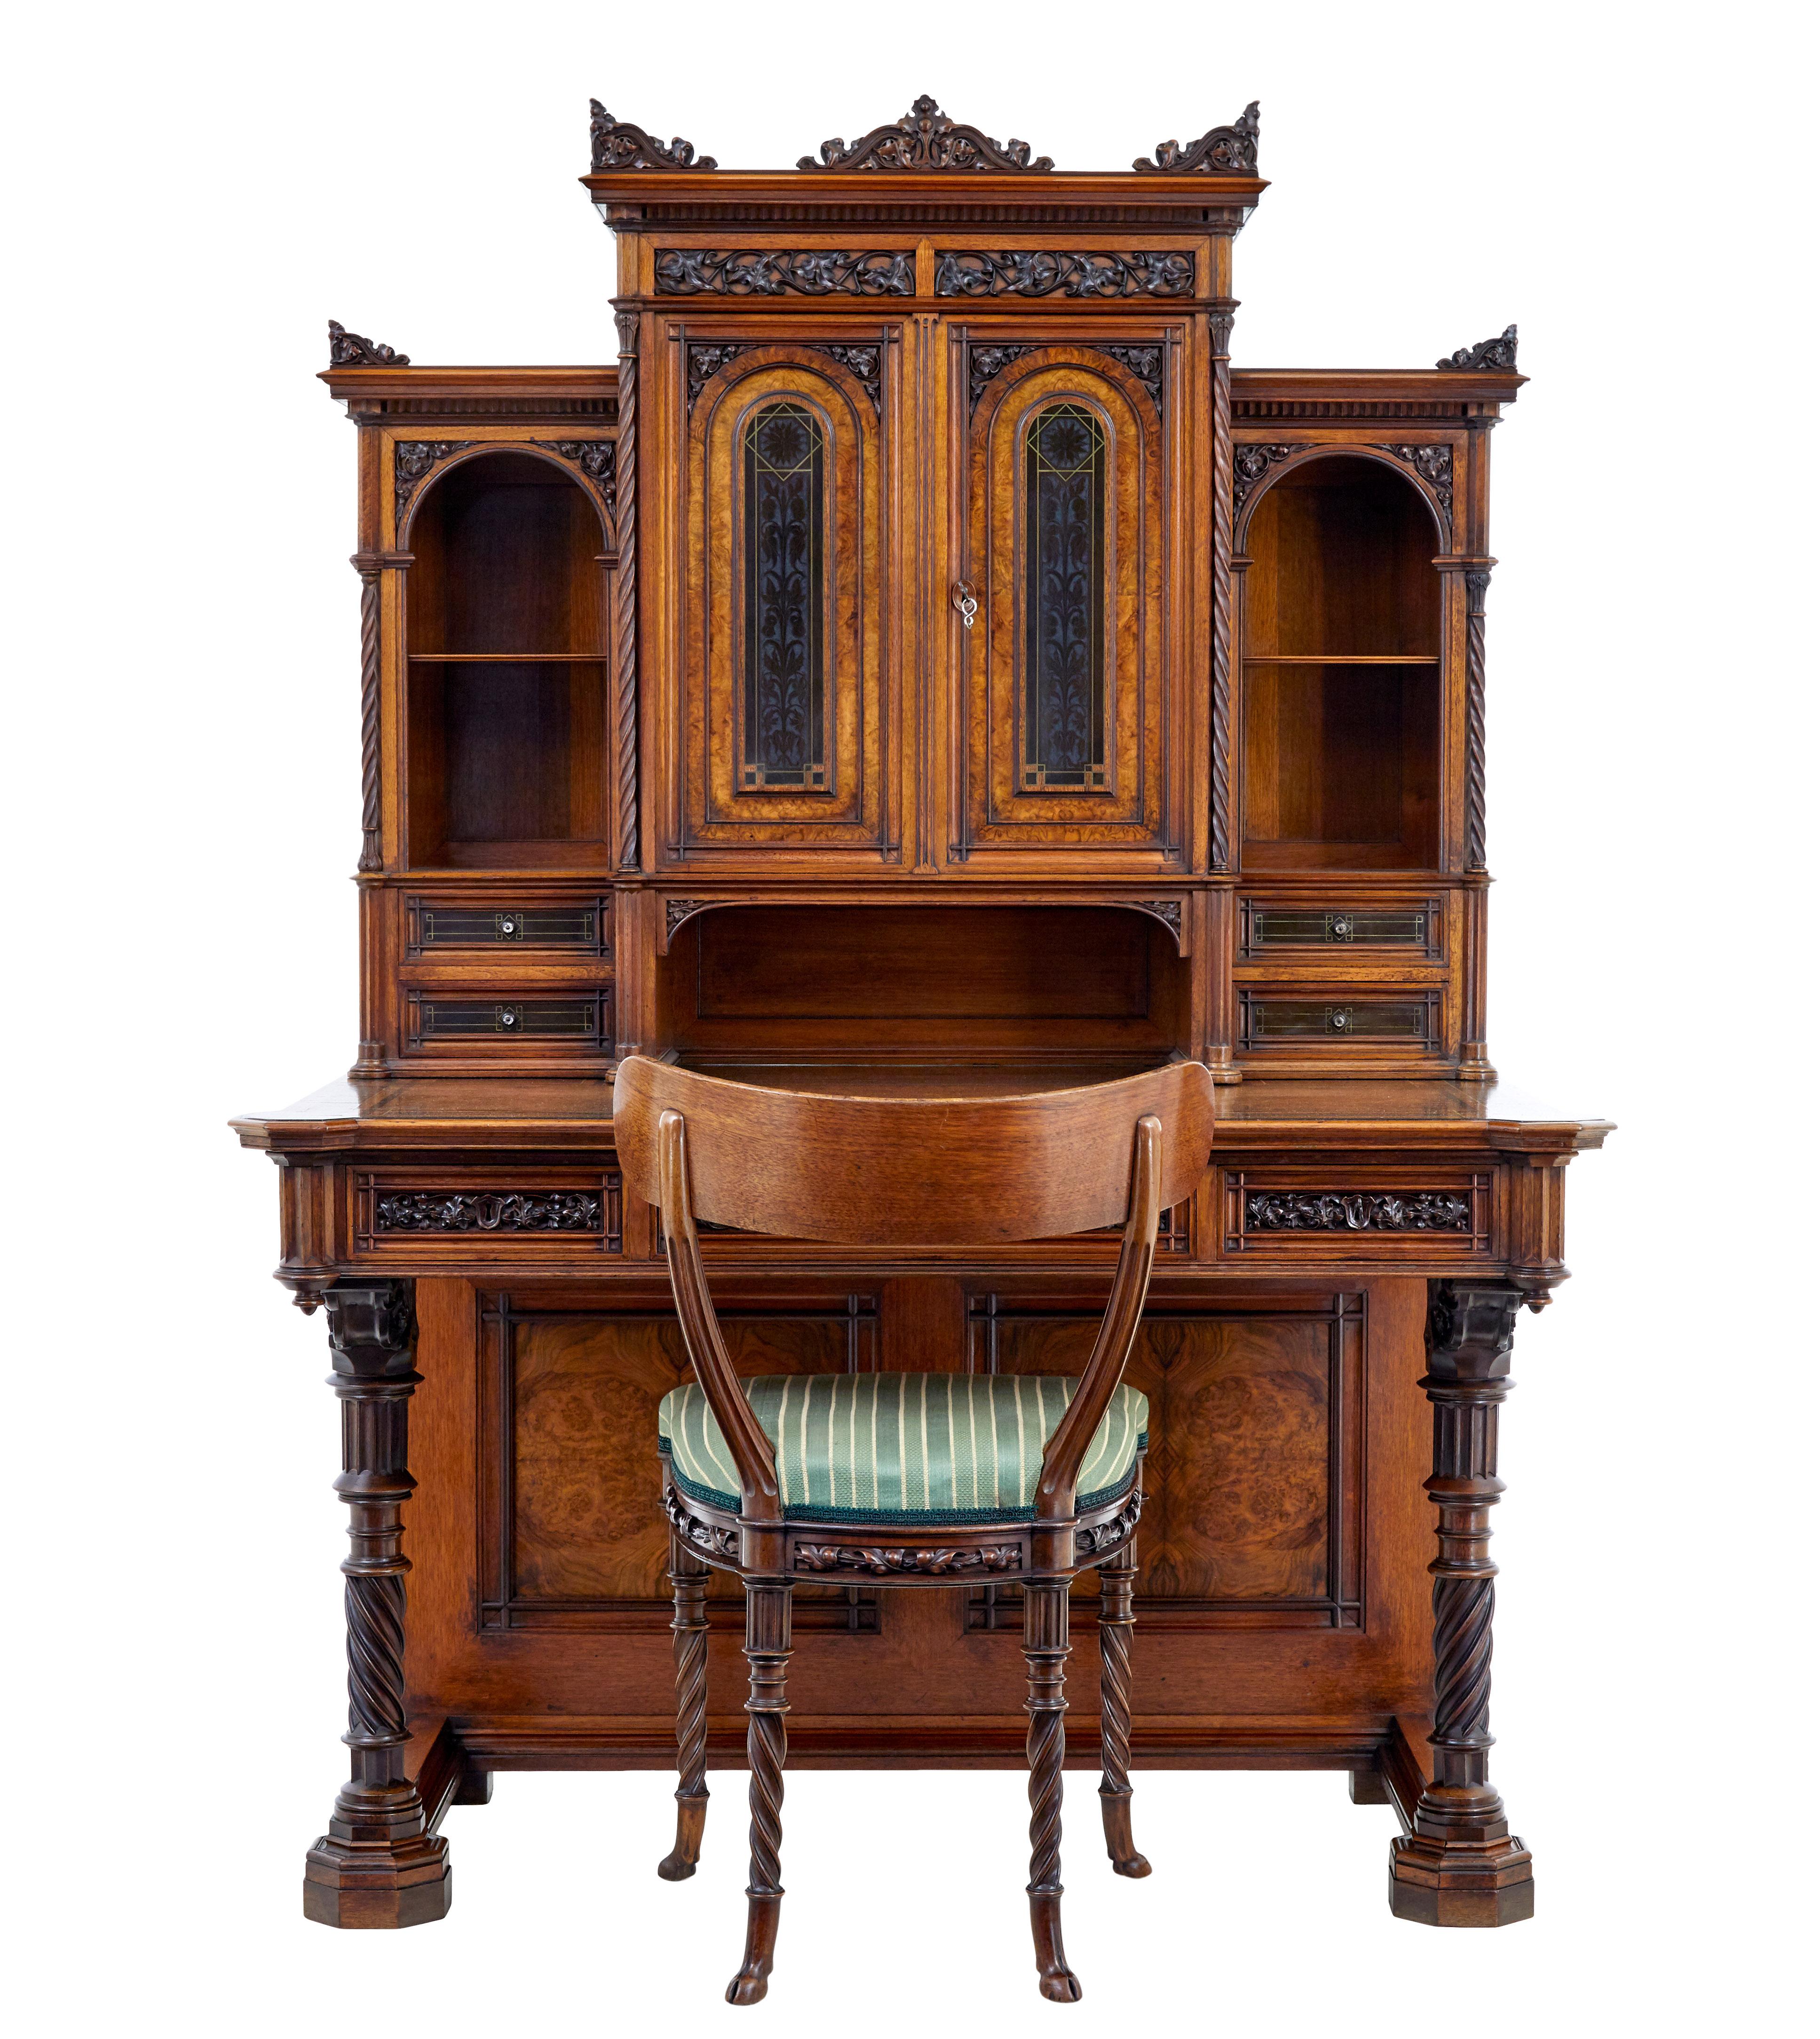 19th century carved walnut desk and chair circa 1880.

Superb quality desk with original chair made by anders svensson of malmo.  Svensson was a cabinet maker to the swedish royal family and this piece was ordered by jacob gleerup, son of c.W.K